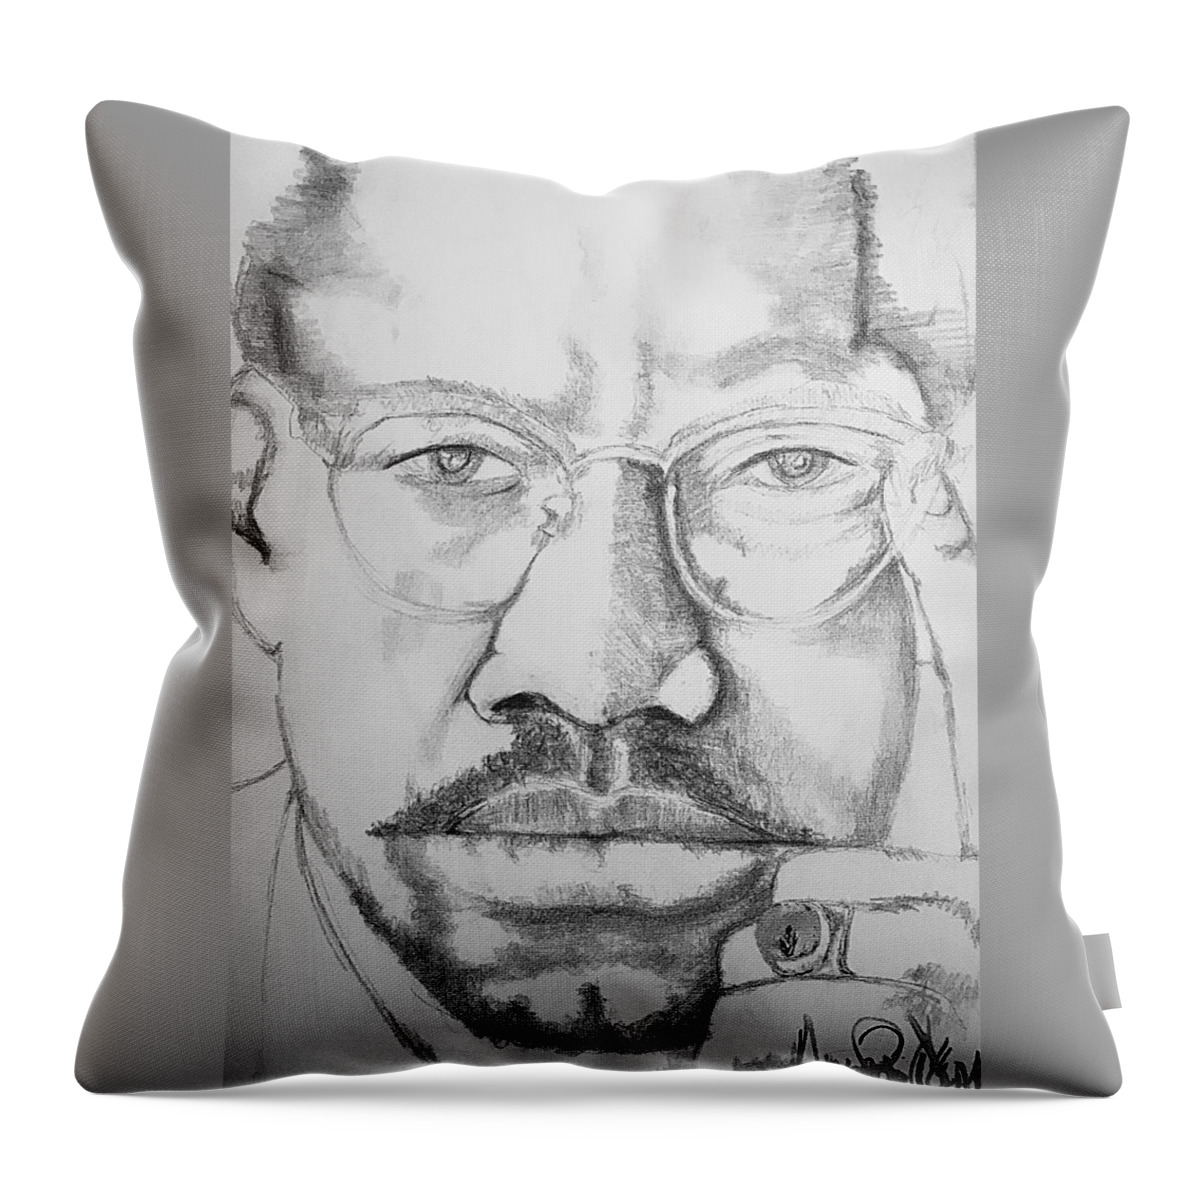  Throw Pillow featuring the drawing X by Angie ONeal